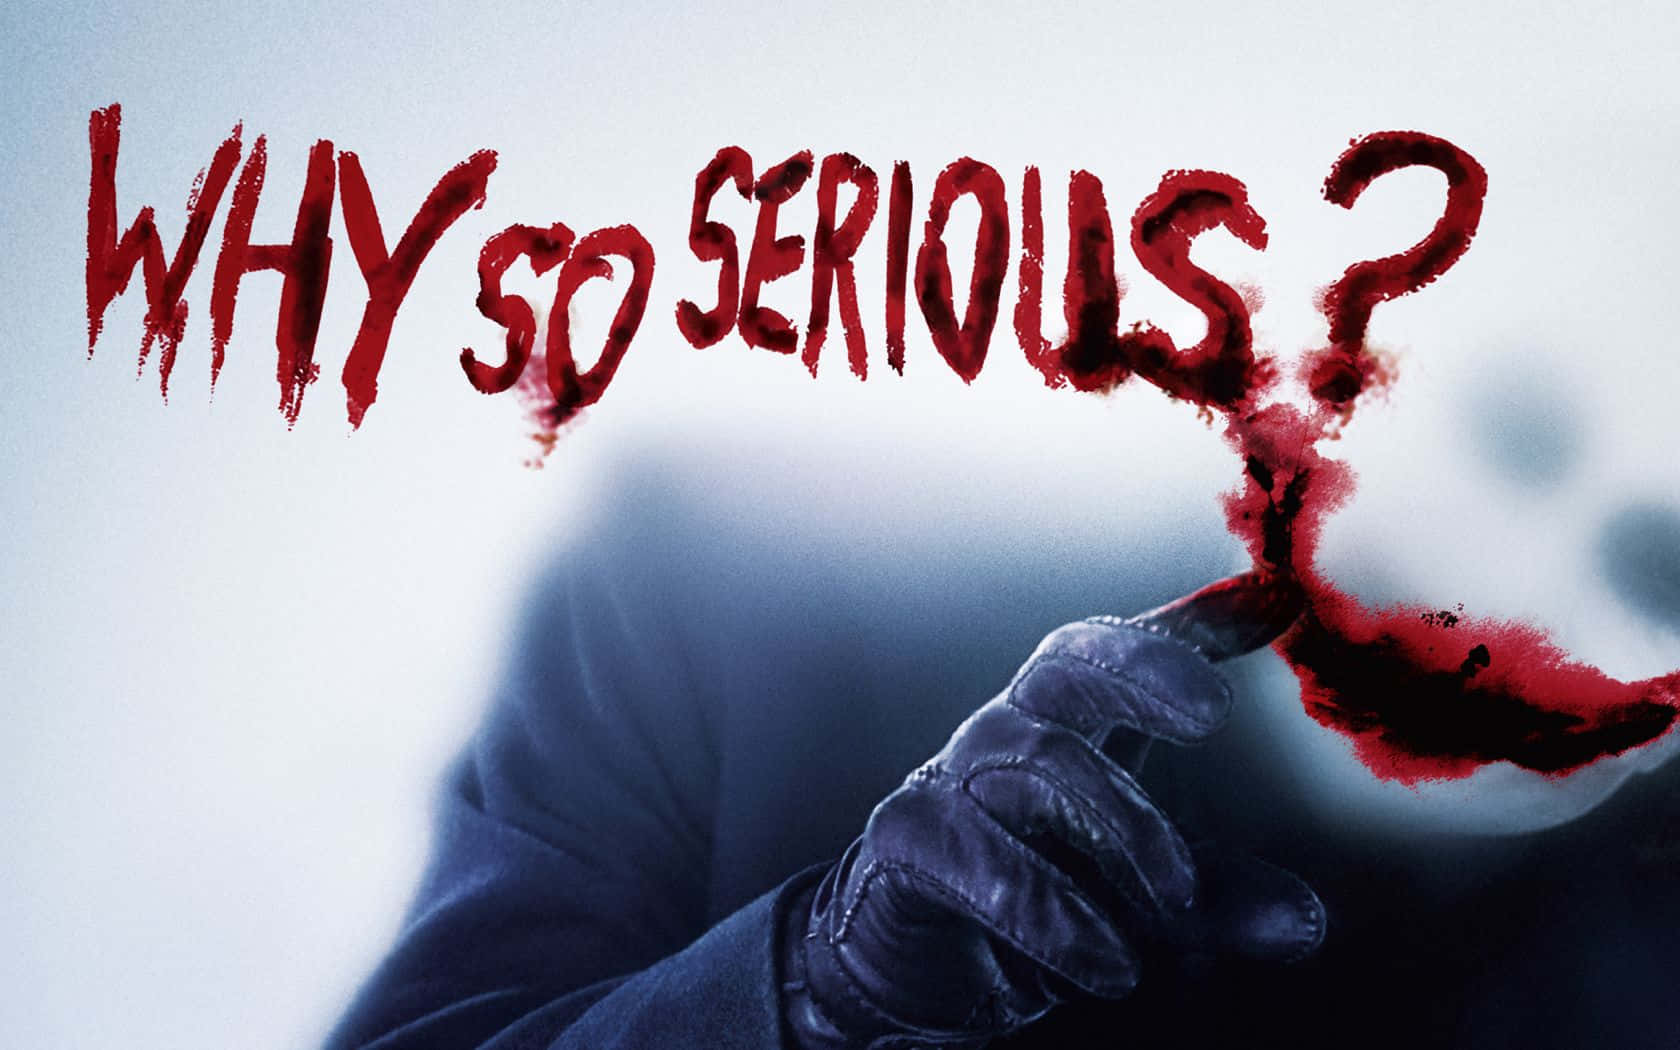 Why So Serious In Red Ink On A Glass Wall Wallpaper